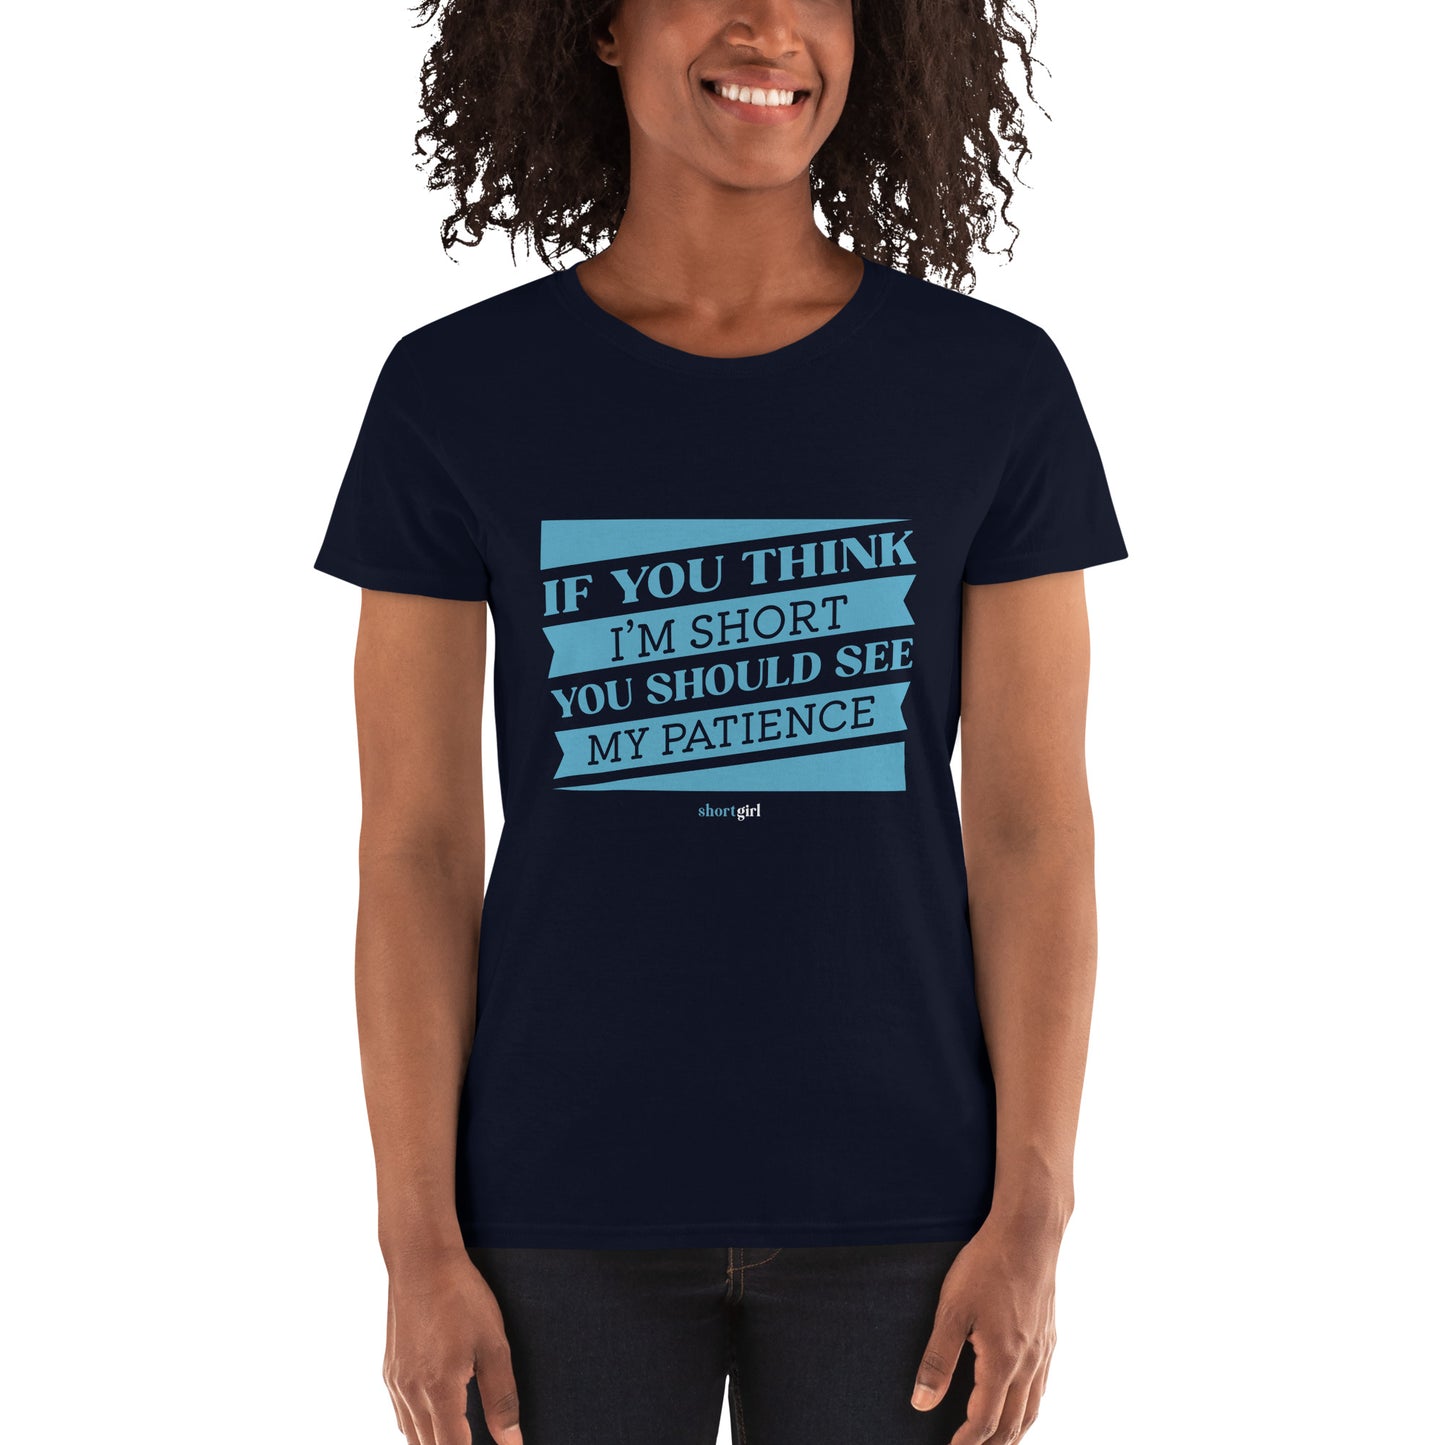 Women's short sleeve t-shirt - If you think im short, you should see my patience